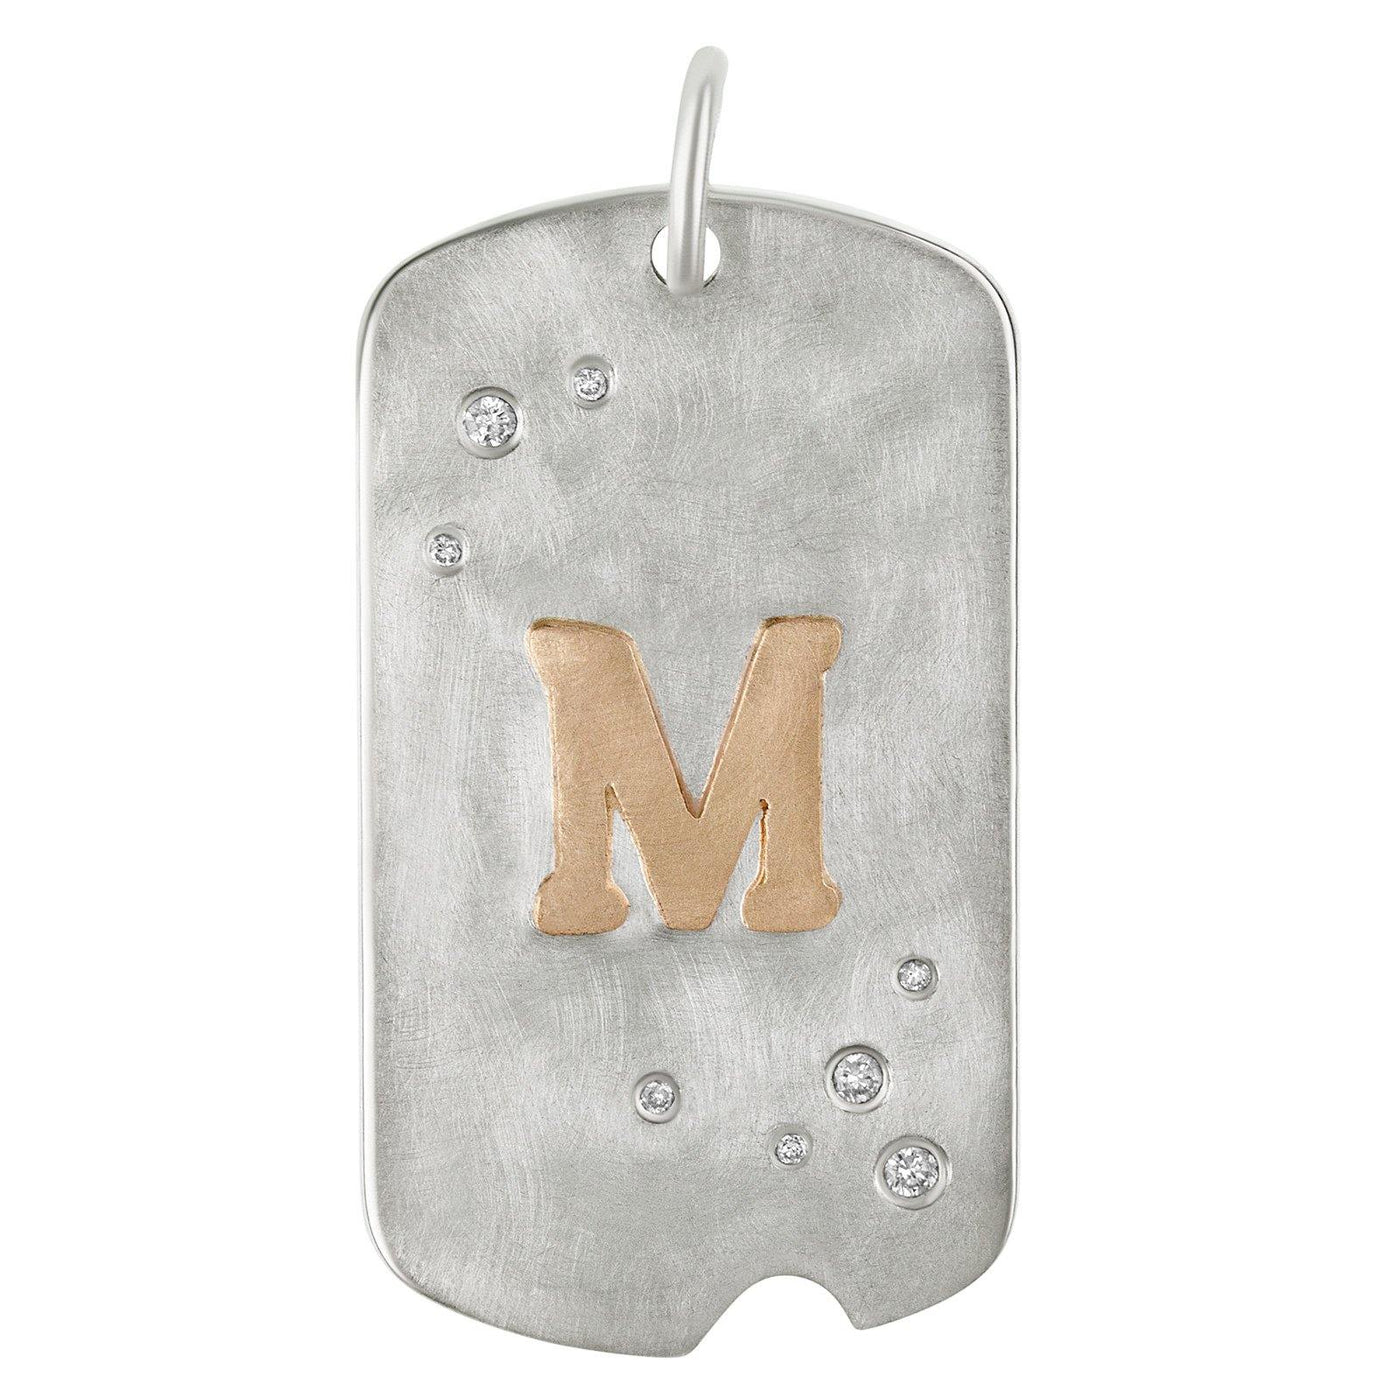 Initial Dog Tag - Heather B. Moore